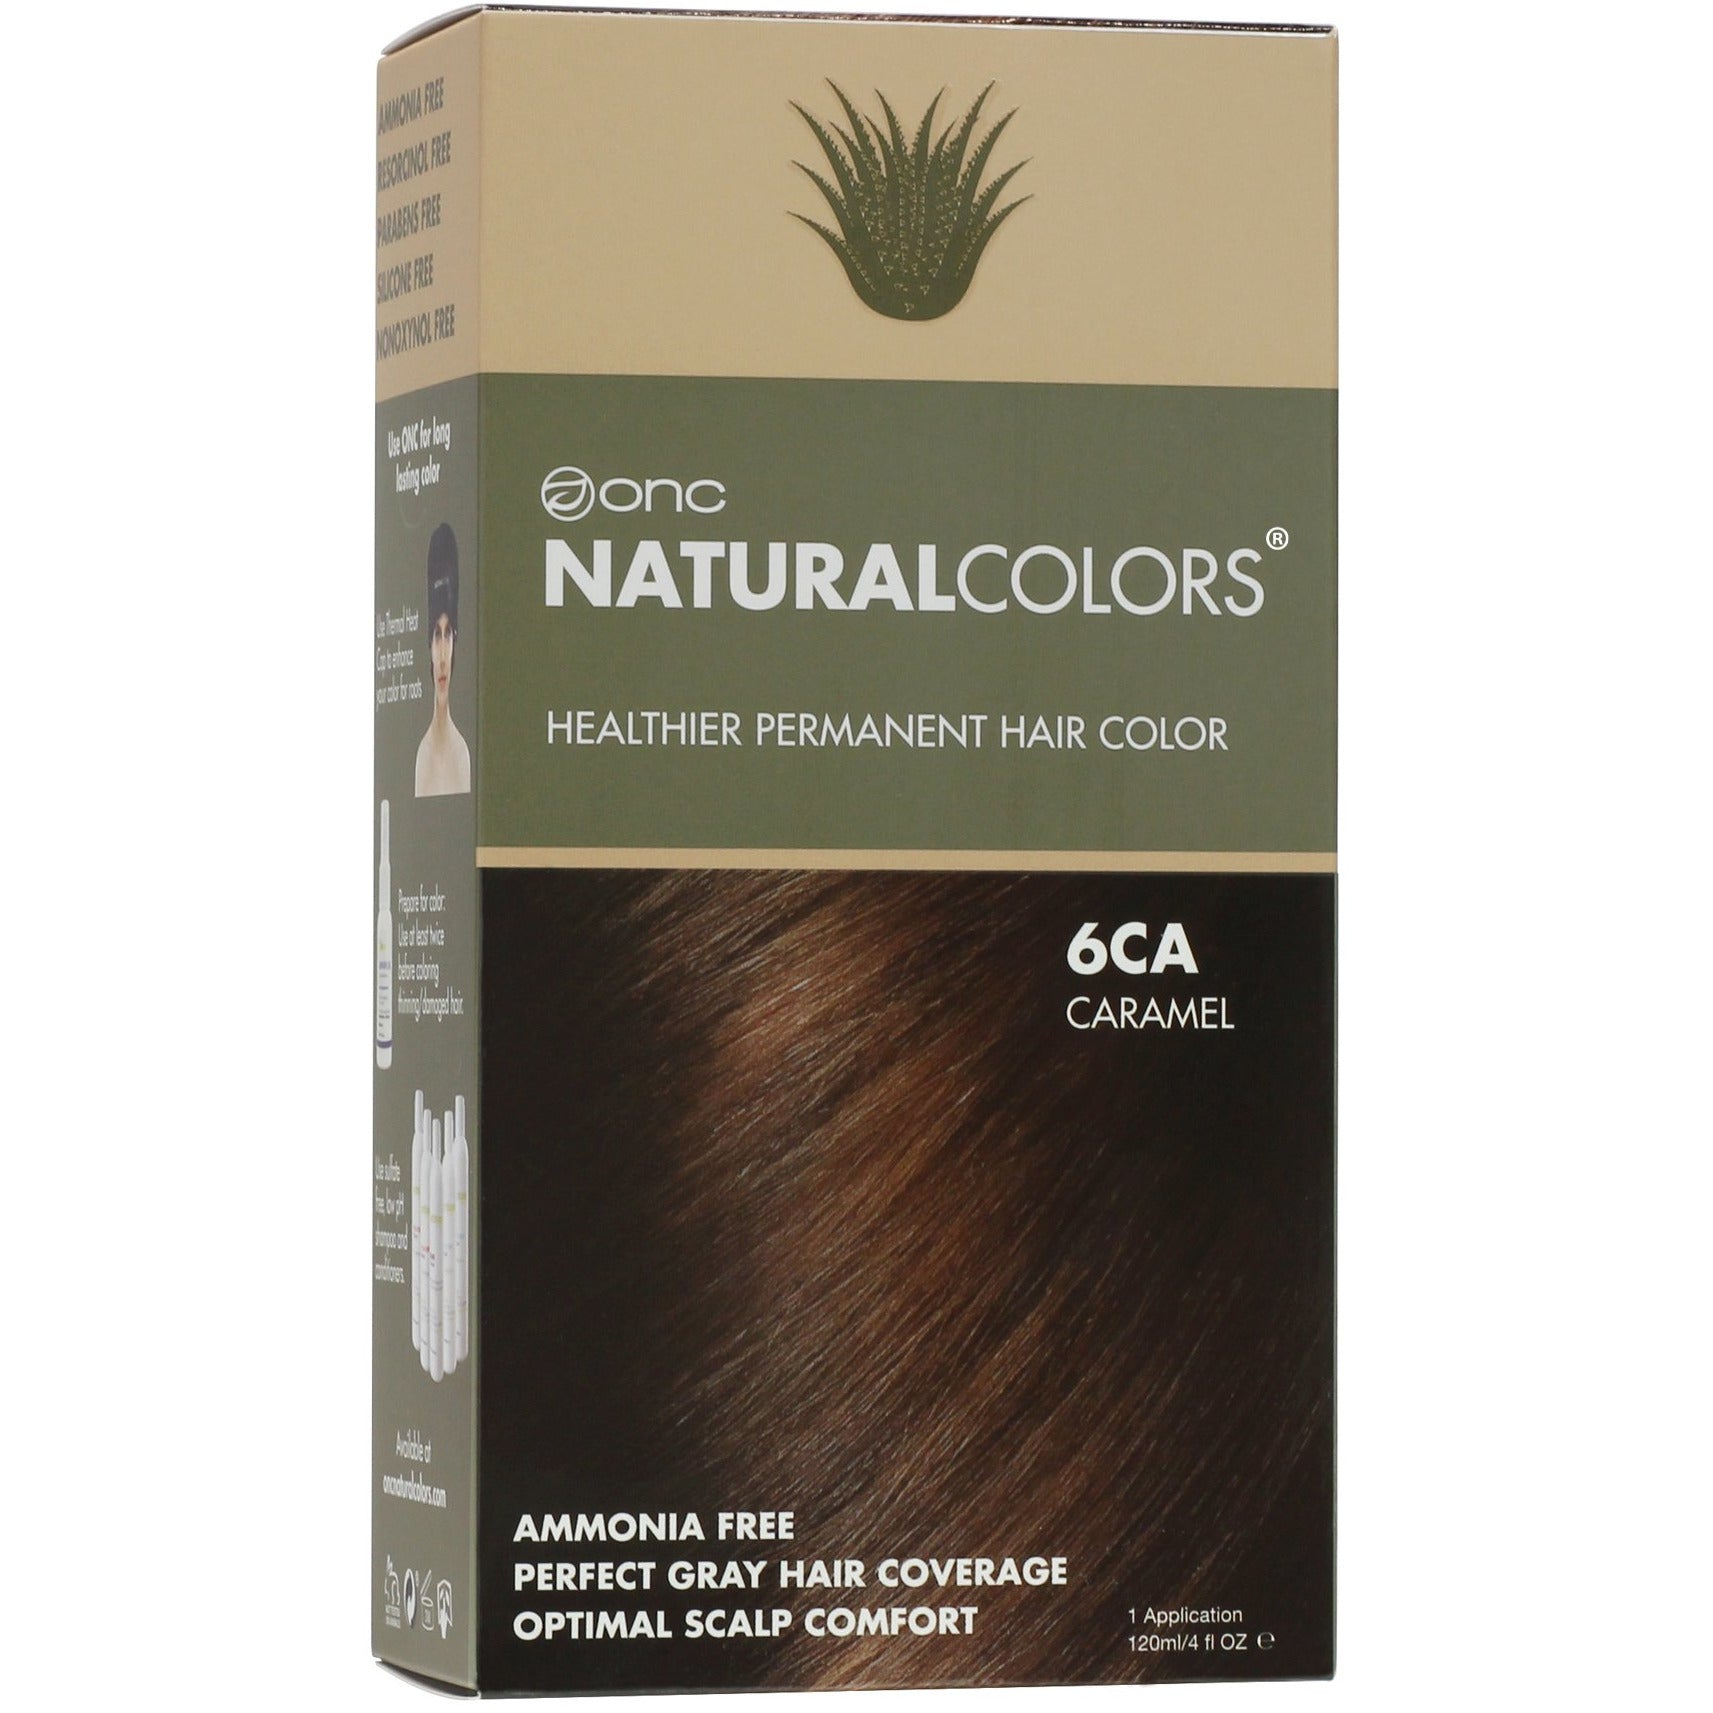 6CA Caramel Heat Activated Hair Dye With Organic Ingredients - 120 ml (4 fl. oz)